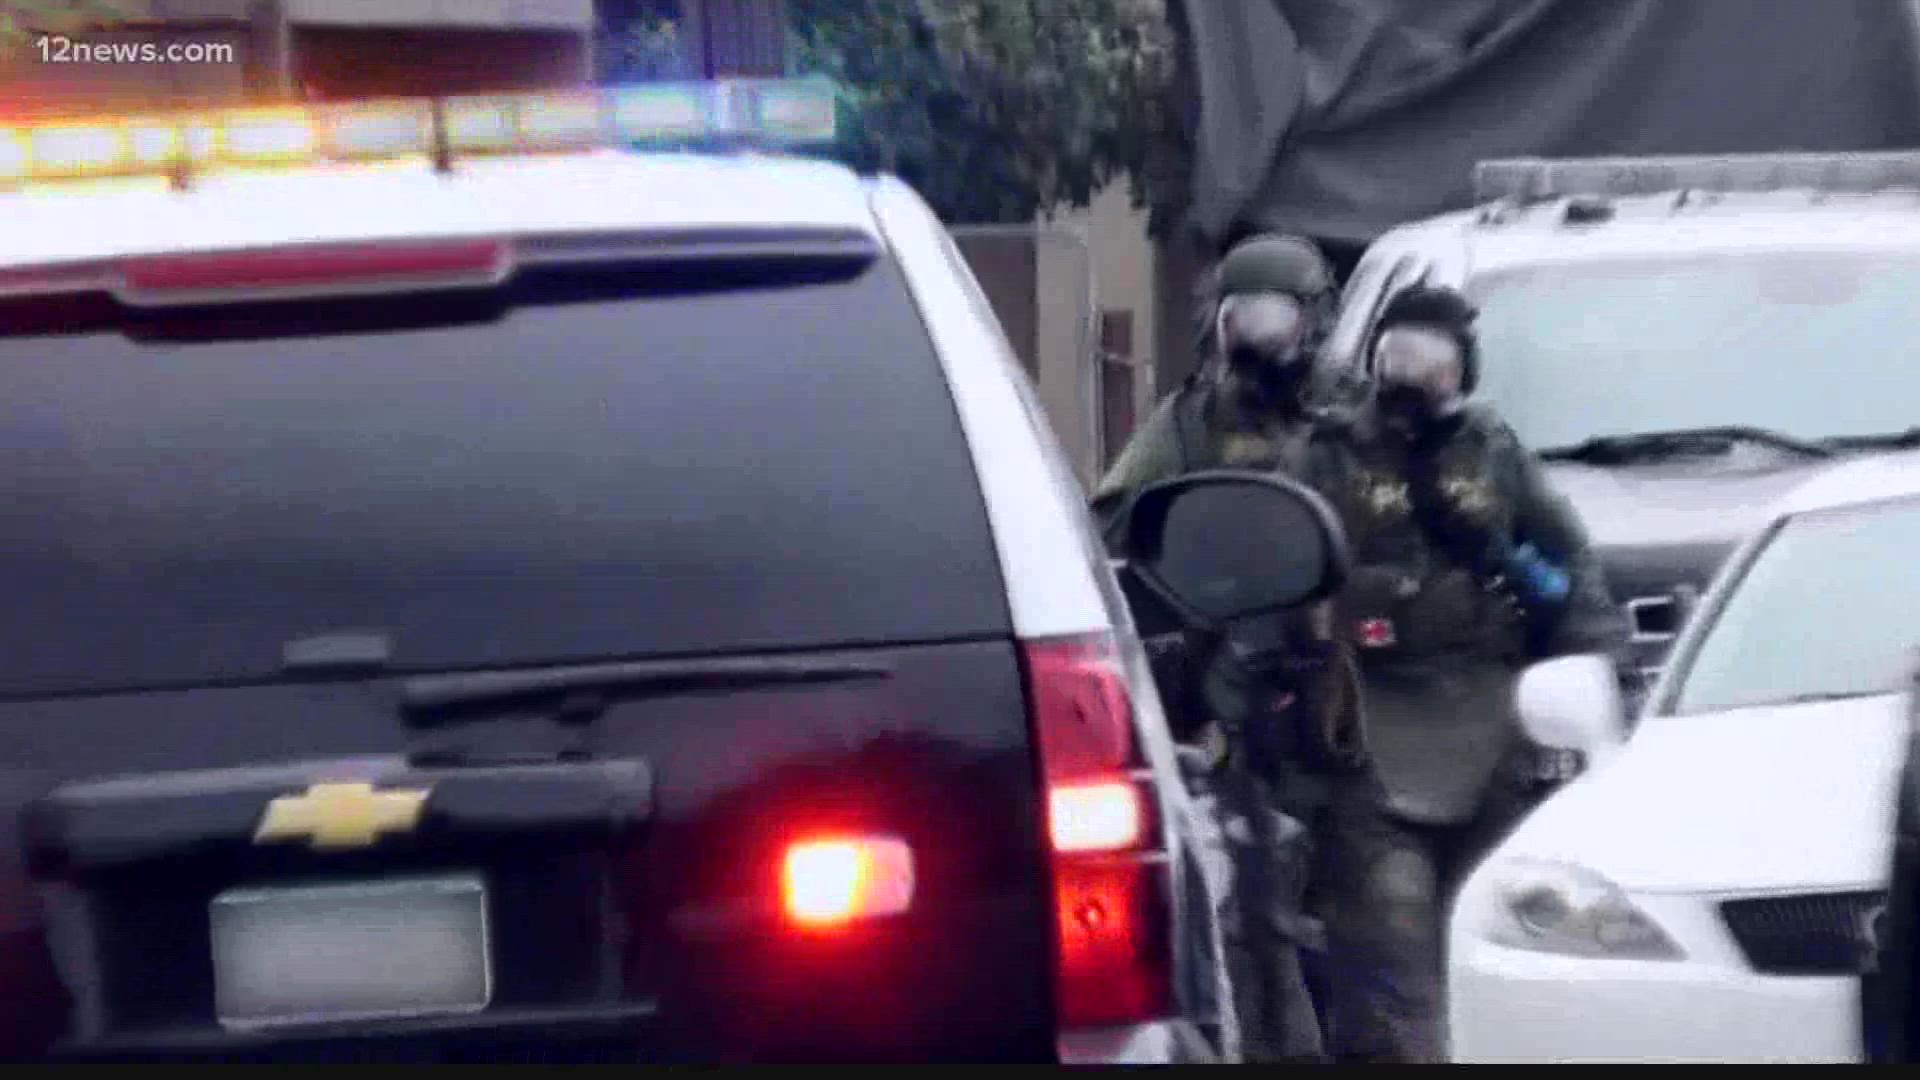 The Goodyear Police Department’s SWAT team is back up and running with “revamped” standards after a three-month shut down stemming from an I-Team investigation.